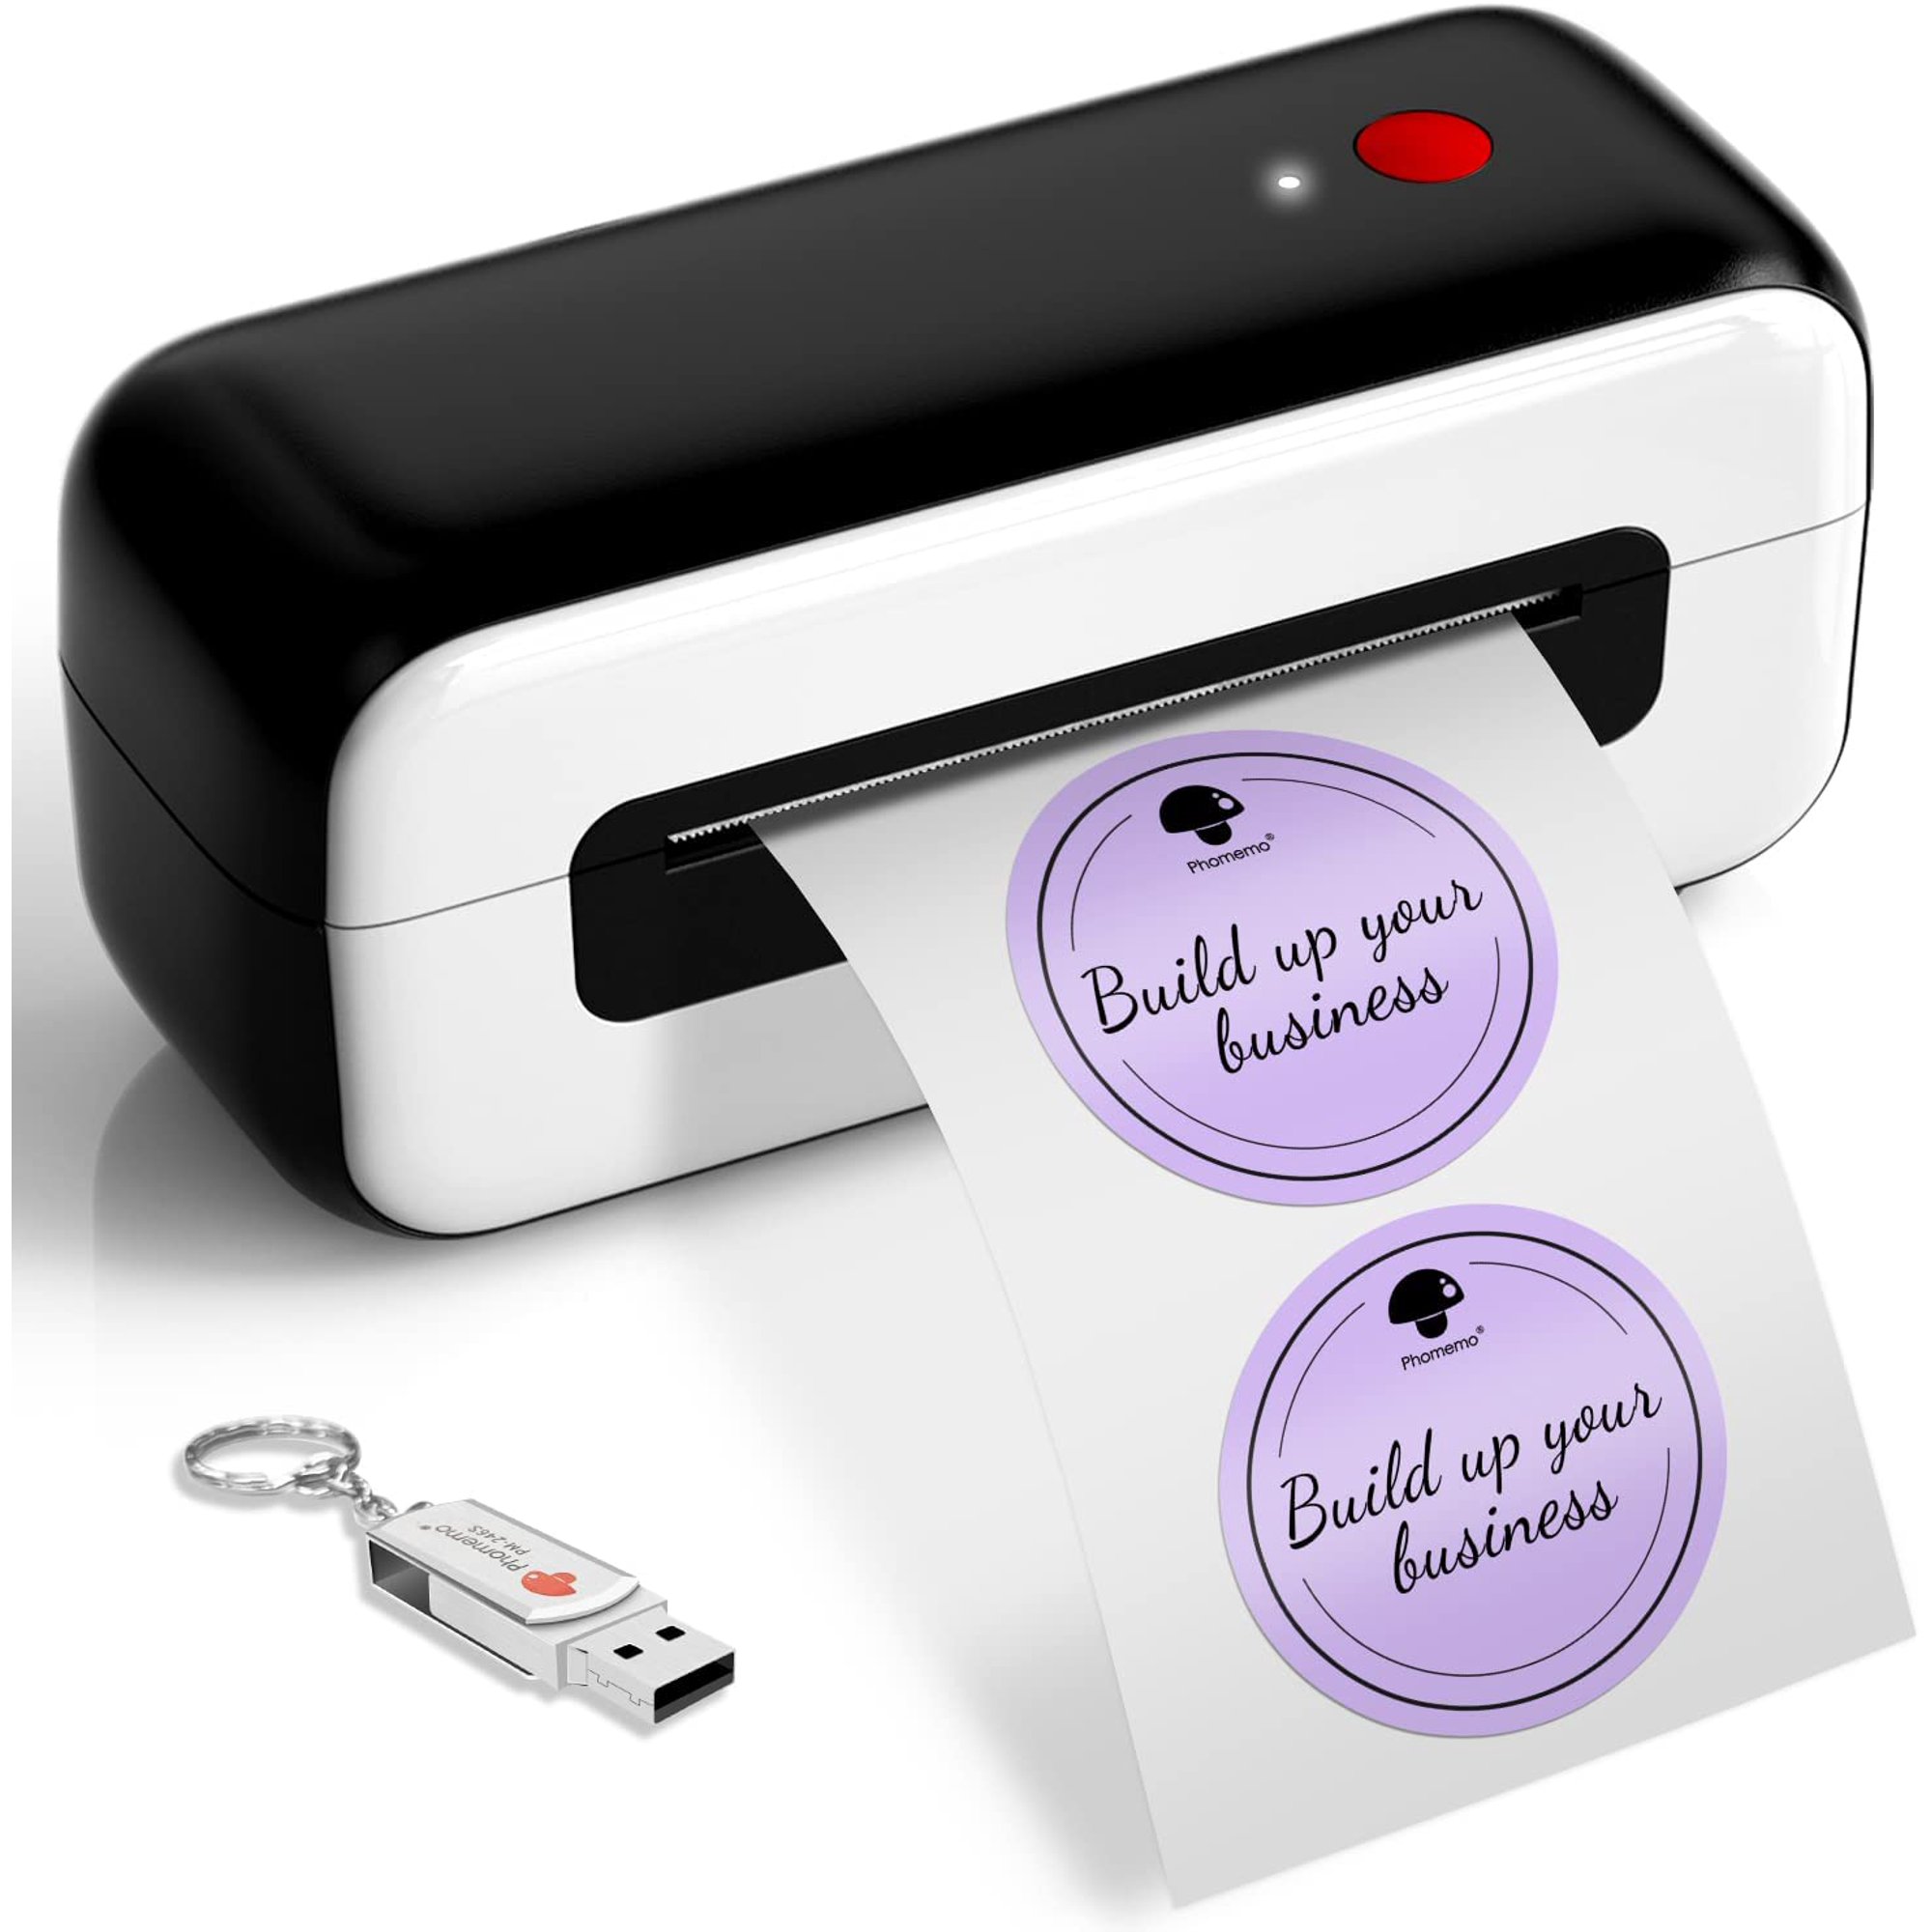 Shipping Label Printer for Shipping Packages, Desktop USB 4x6 Thermal labels Printer Label Maker Compatible with USPS, UPS, Shopify, Ebay, Etsy, ShippingEasy